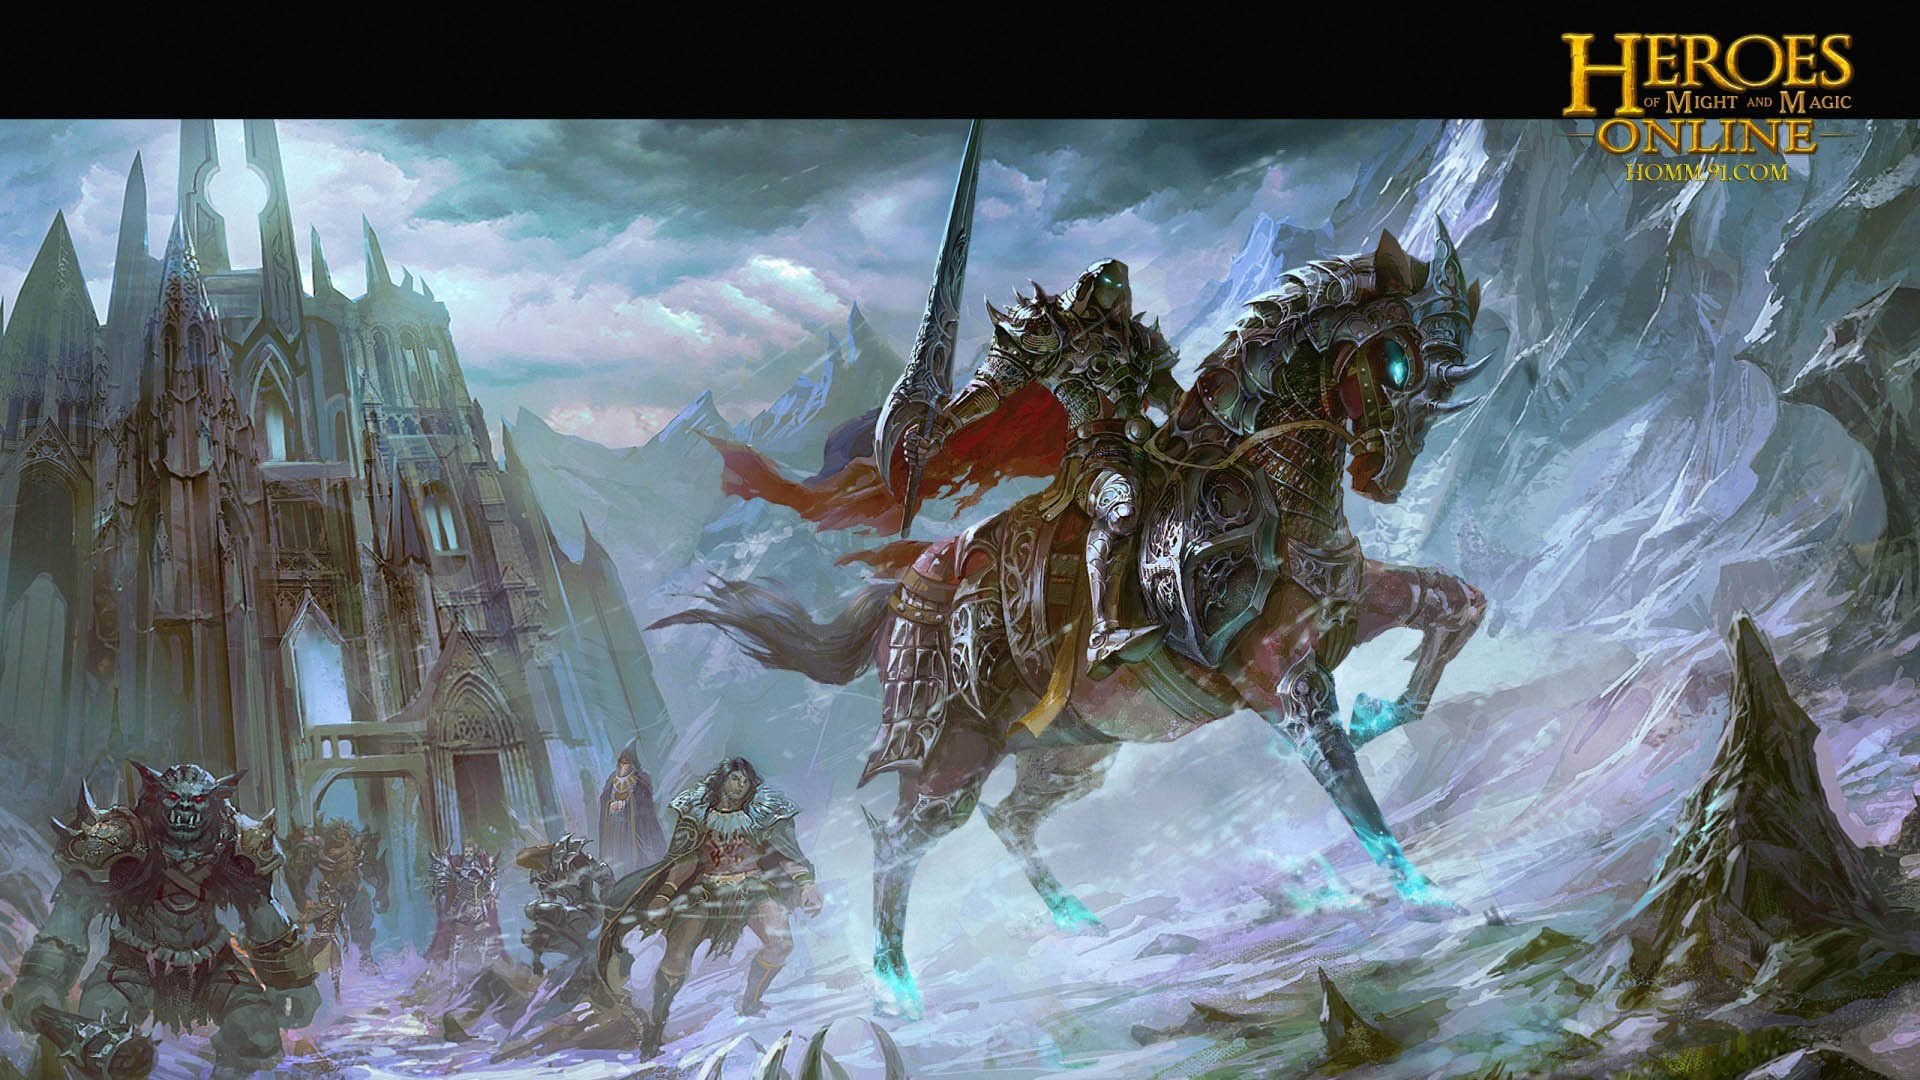 heroes, Might, Magic, Strategy, Fantasy, Fighting, Adventure, Action, Online, 1hmm, Poster, Warrior, Knight, Armor, Horse, Sword, Castle Wallpaper